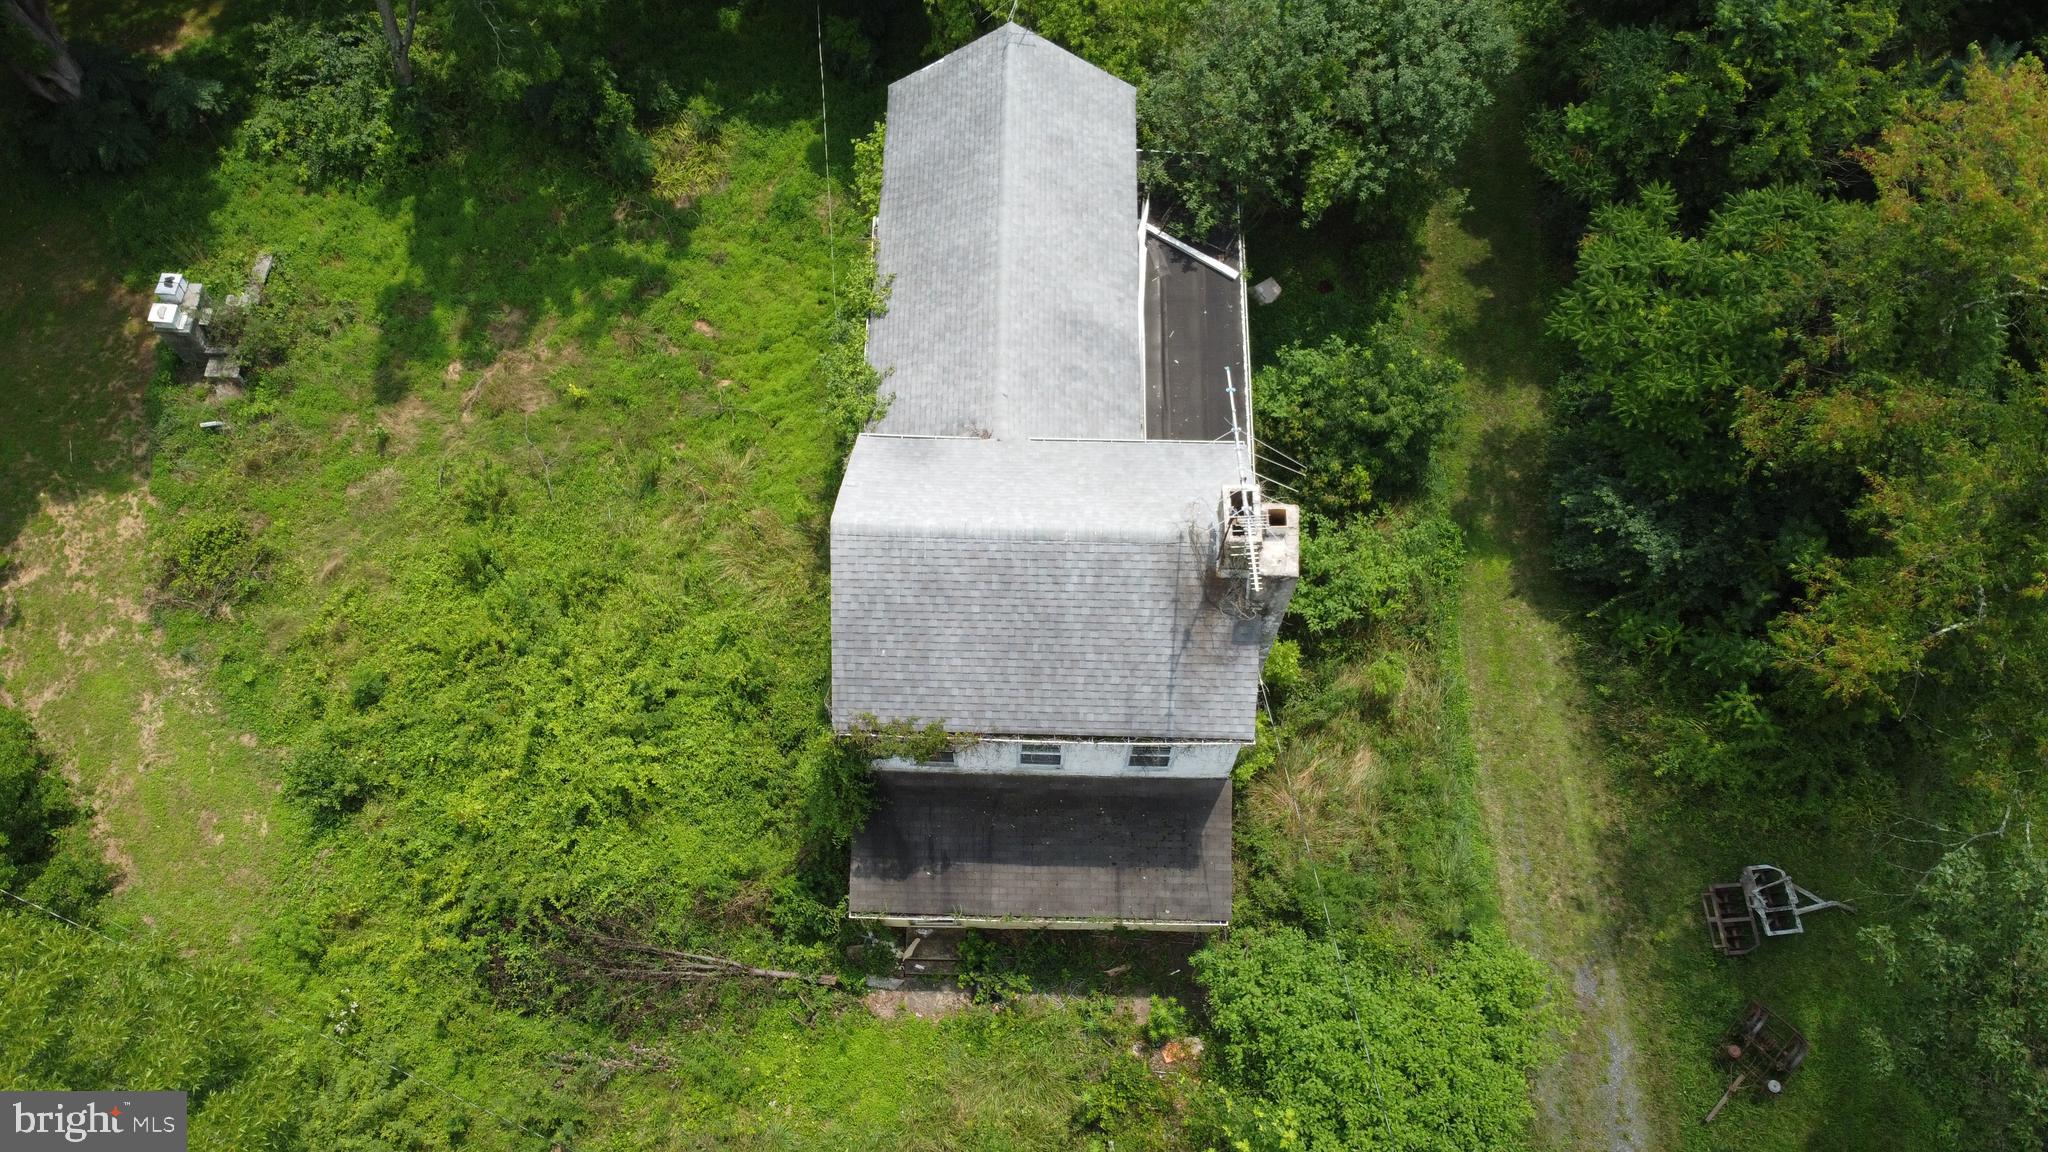 an aerial view of a house with a yard and tree s